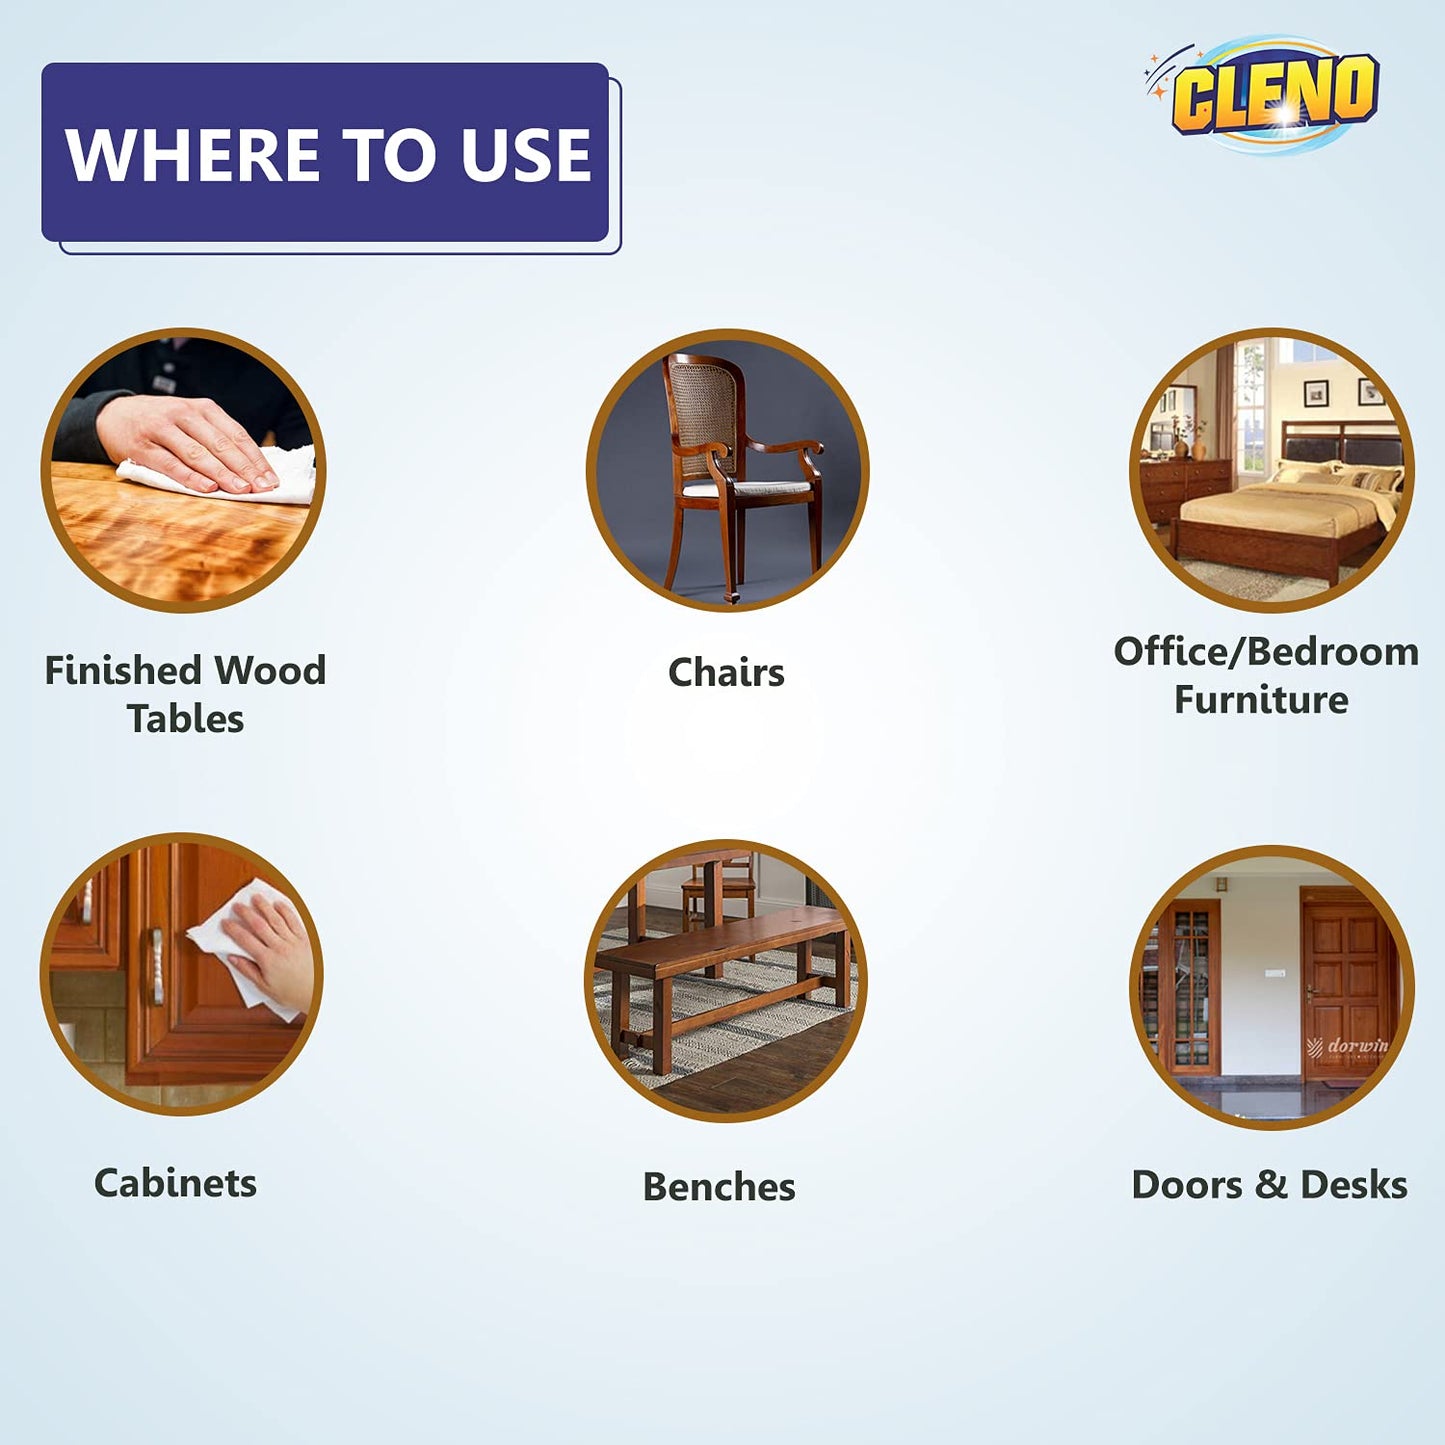 Cleno Wood  Laminate Furniture Wet Wipes Clean Restore Polish  Protects TablesChairsCupboardBedroom FurnitureCabinetsBenchesDoorsDesksAll Types of Furniture - 50 Wipes Ready to Use